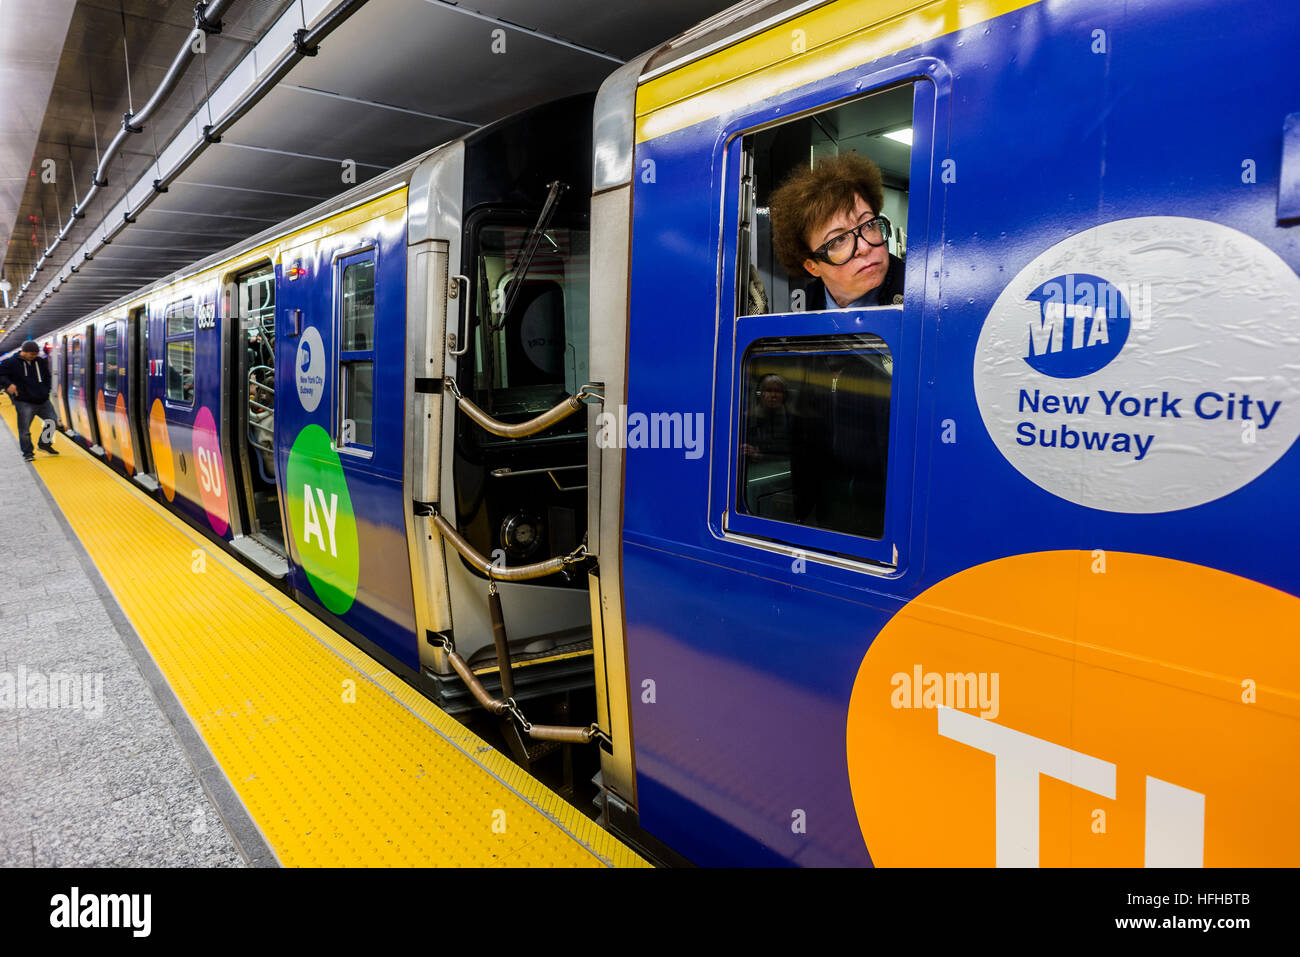 New York, USA 1 January 2017 - After nearly a century the Second Avenue Subway finally opened to the public on New Years Day. Three new stations, at 72nd, 86th and 96th streets, plus an extension at East 63rd were added to the BMT and cost 4.4 billion dollars. The new state of the art subway line runs along BMT lines to Brighton Beach, Brooklyn. ©Stacy Walsh Rosenstock Stock Photo